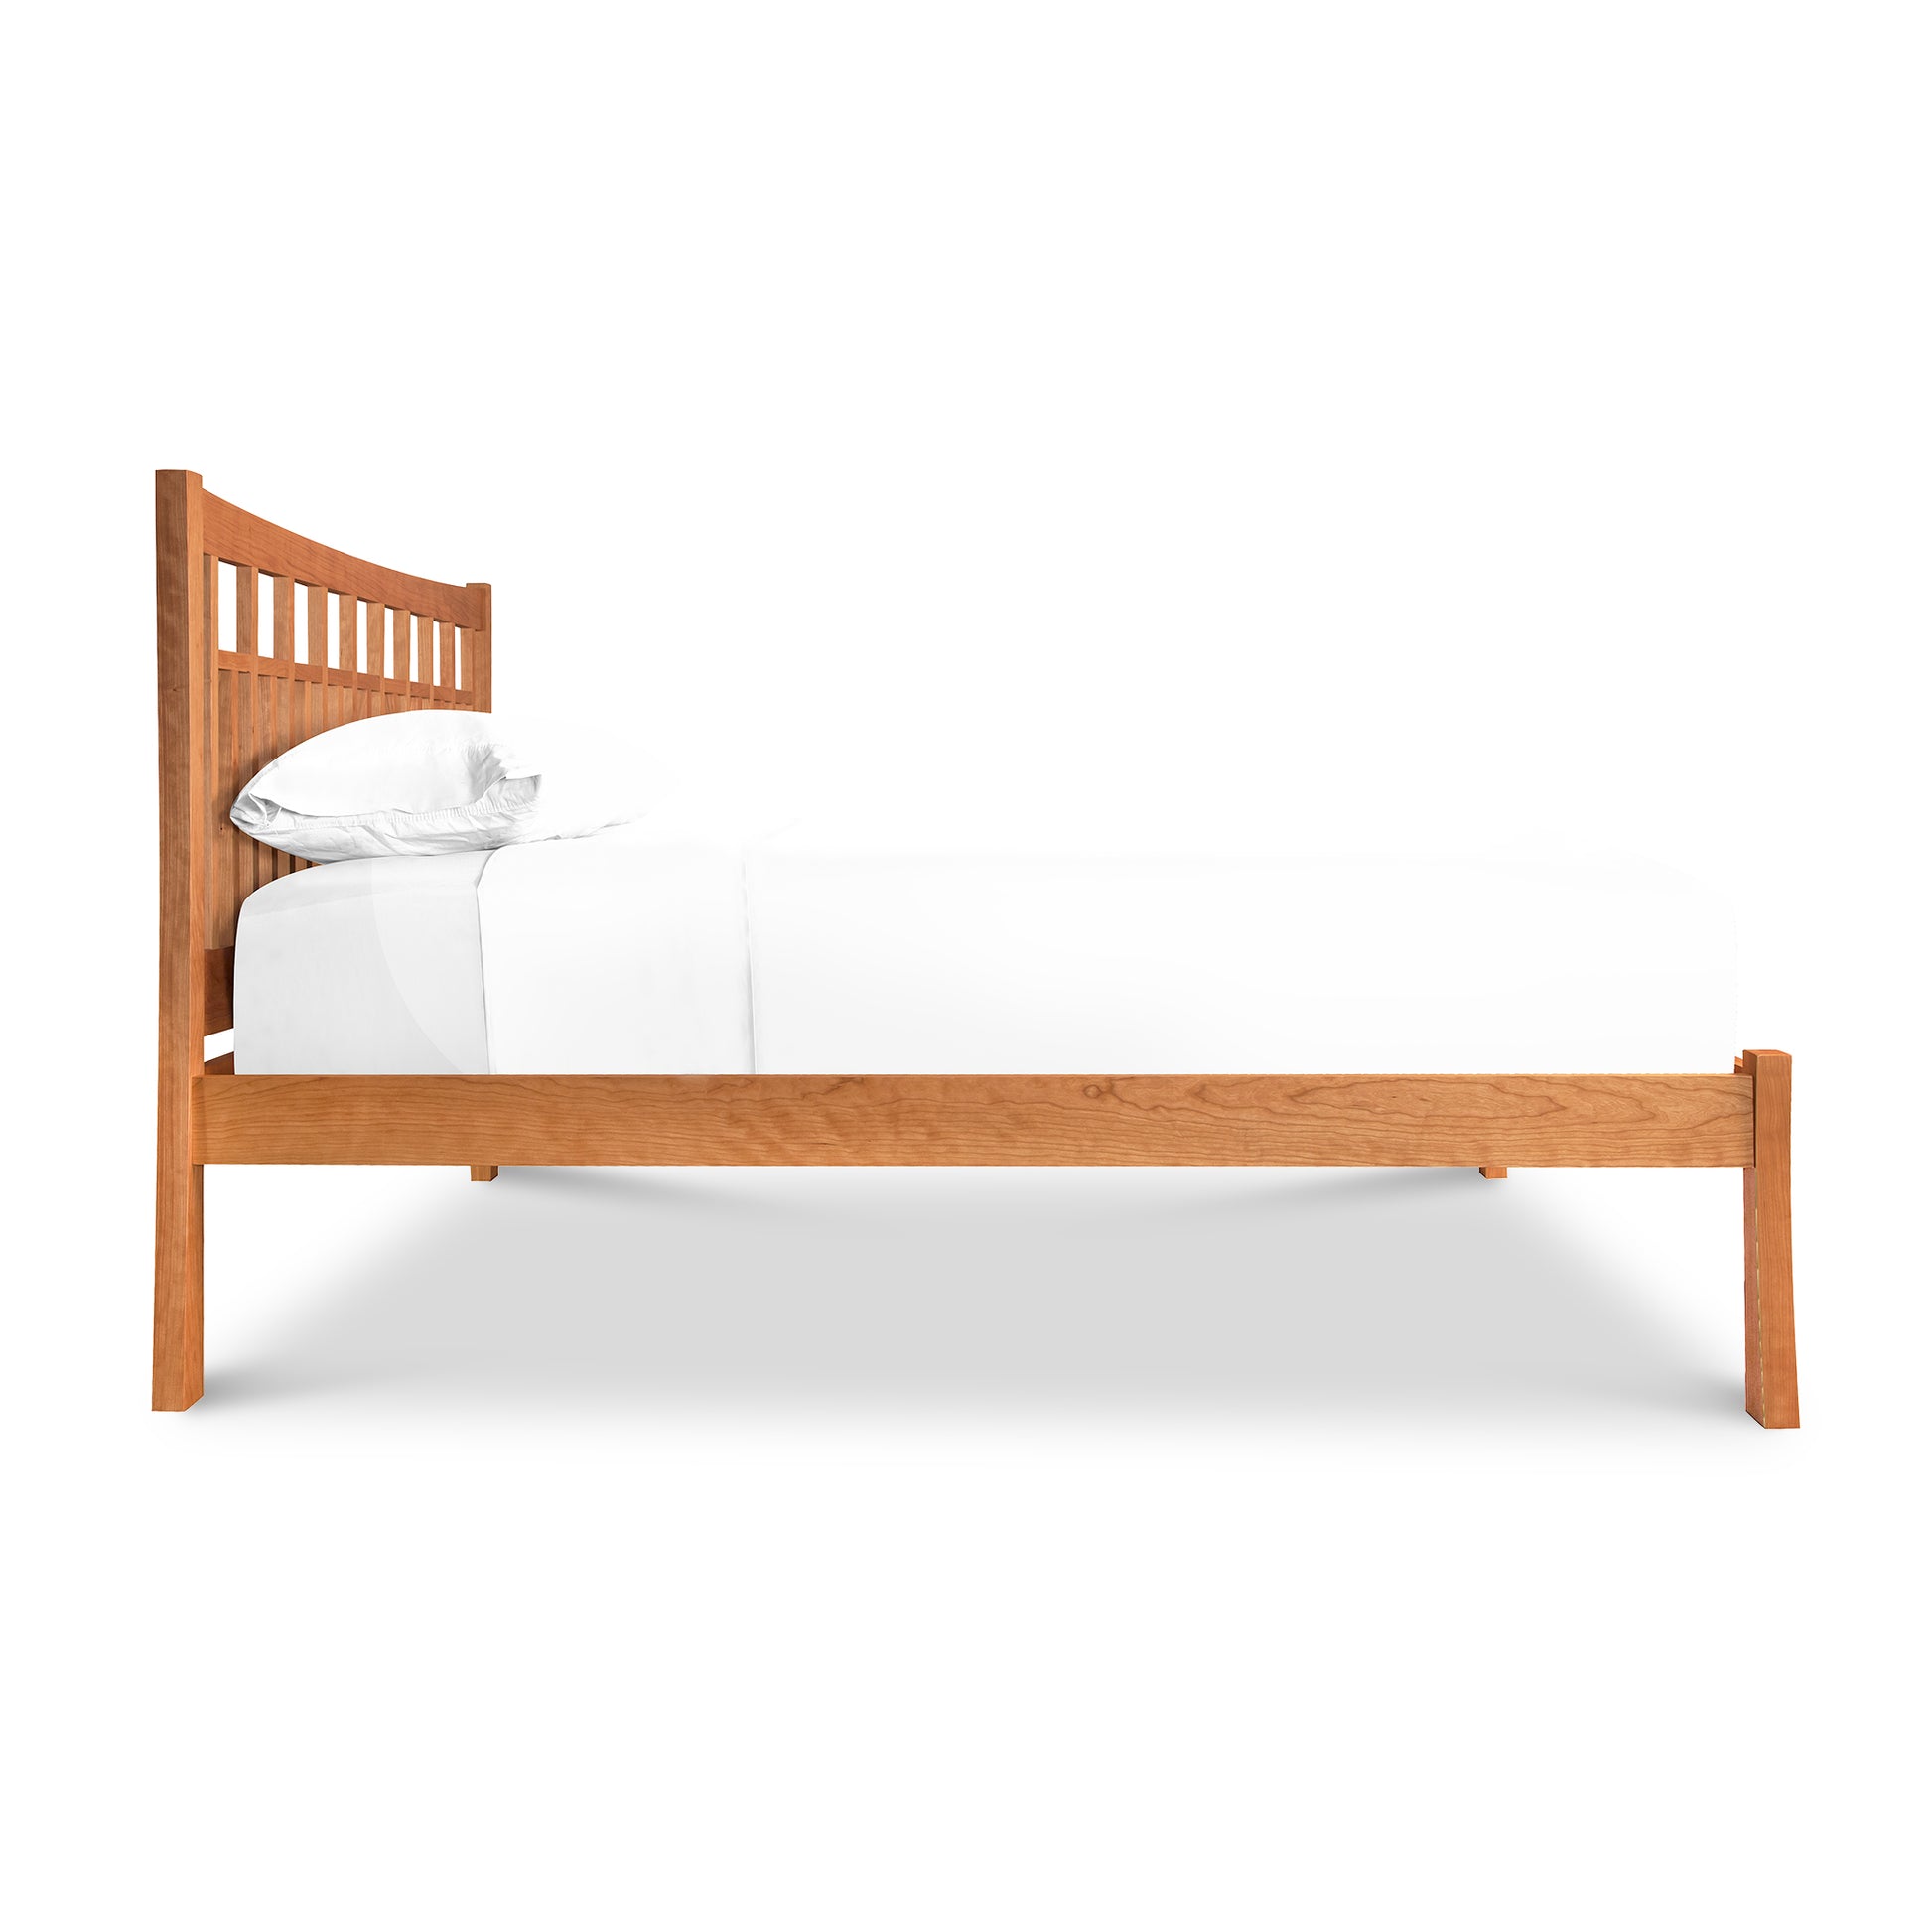 A single Contemporary Craftsman Low Footboard Bed by Vermont Furniture Designs with white bedding against a white background.